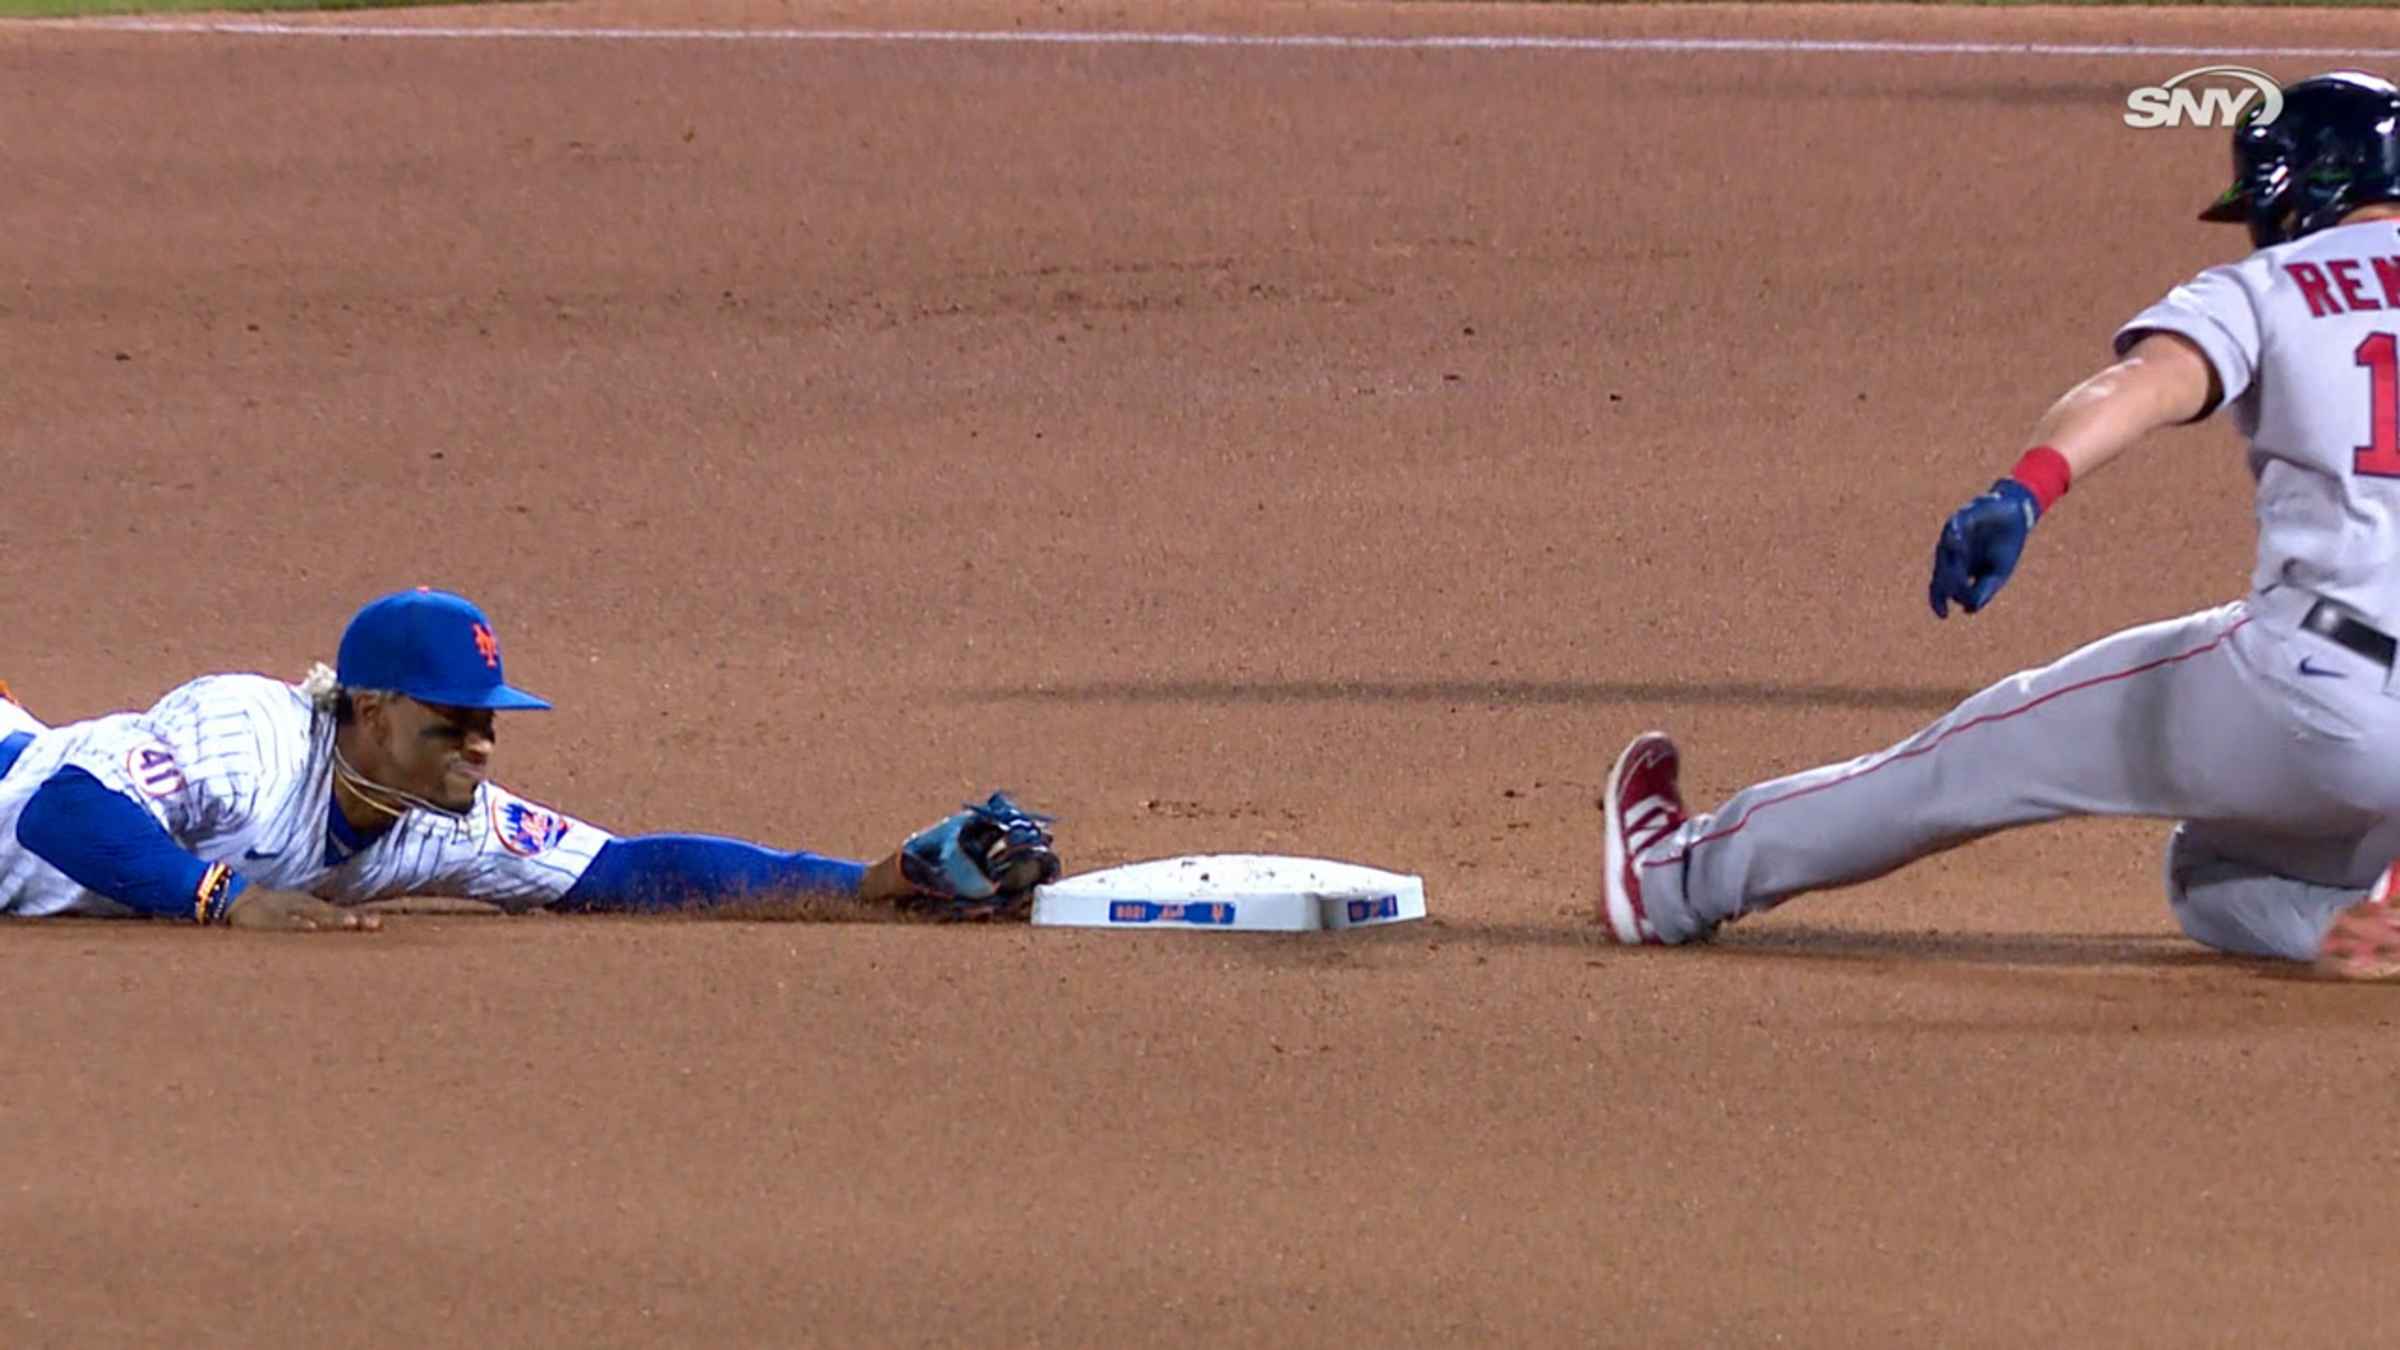 New York Mets Shortstop Francisco Lindor turns a double play on a